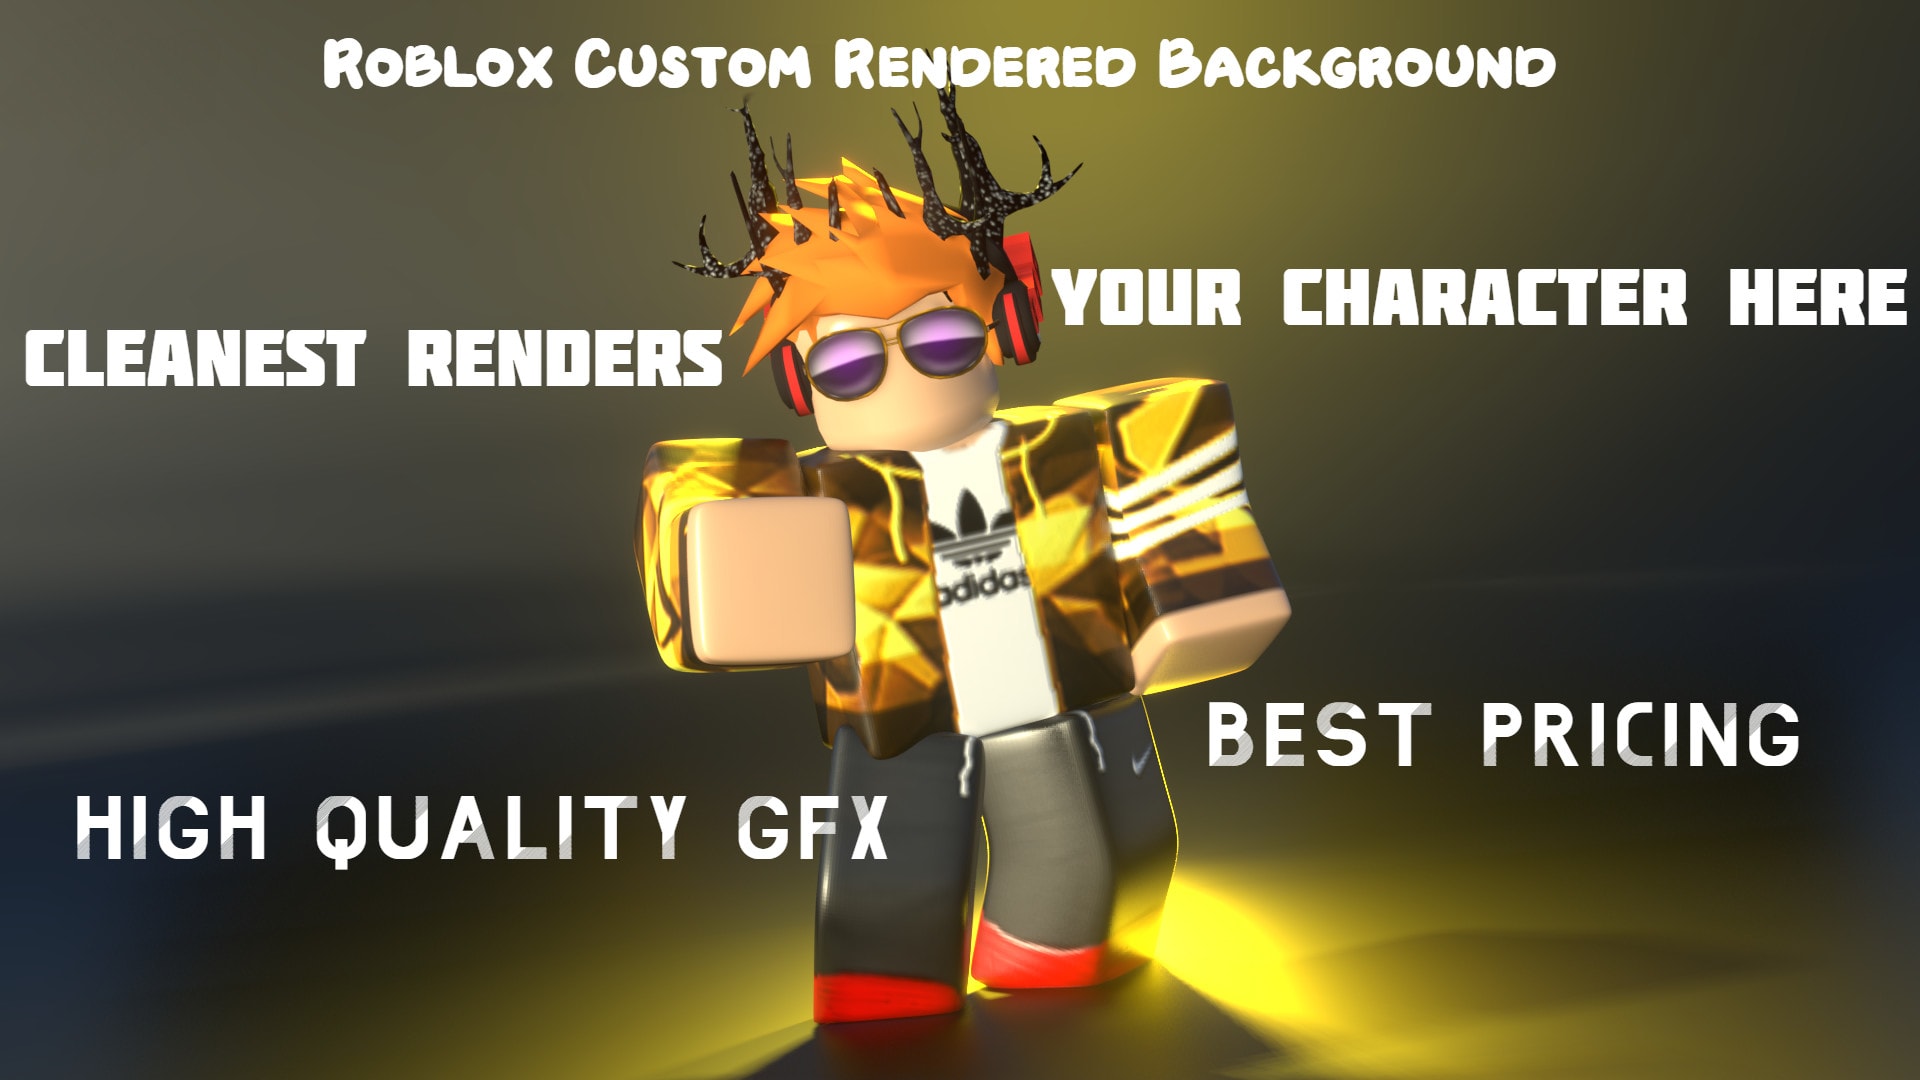 High Quality Gfx Roblox Backgrounds